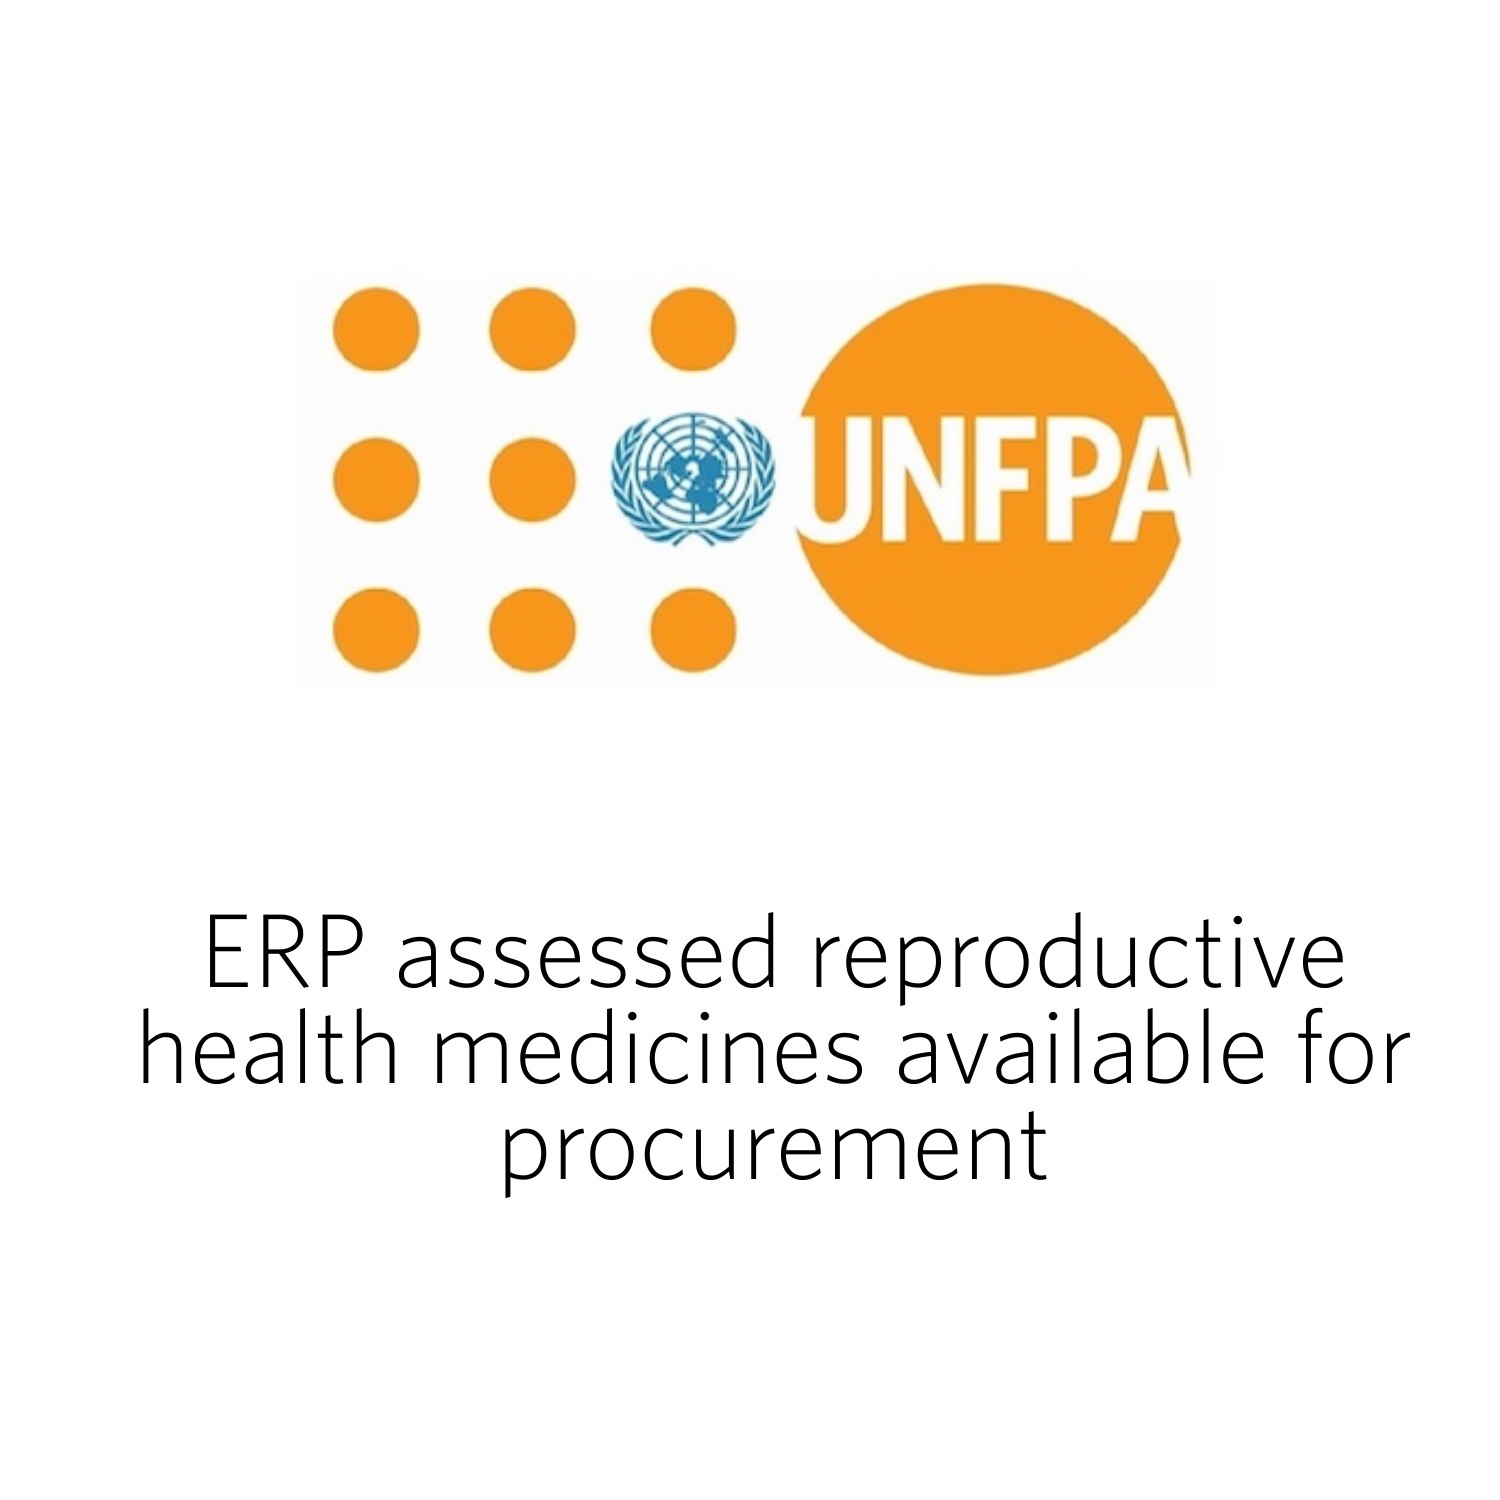 ERP assessed reproductive health medicines available for procurement